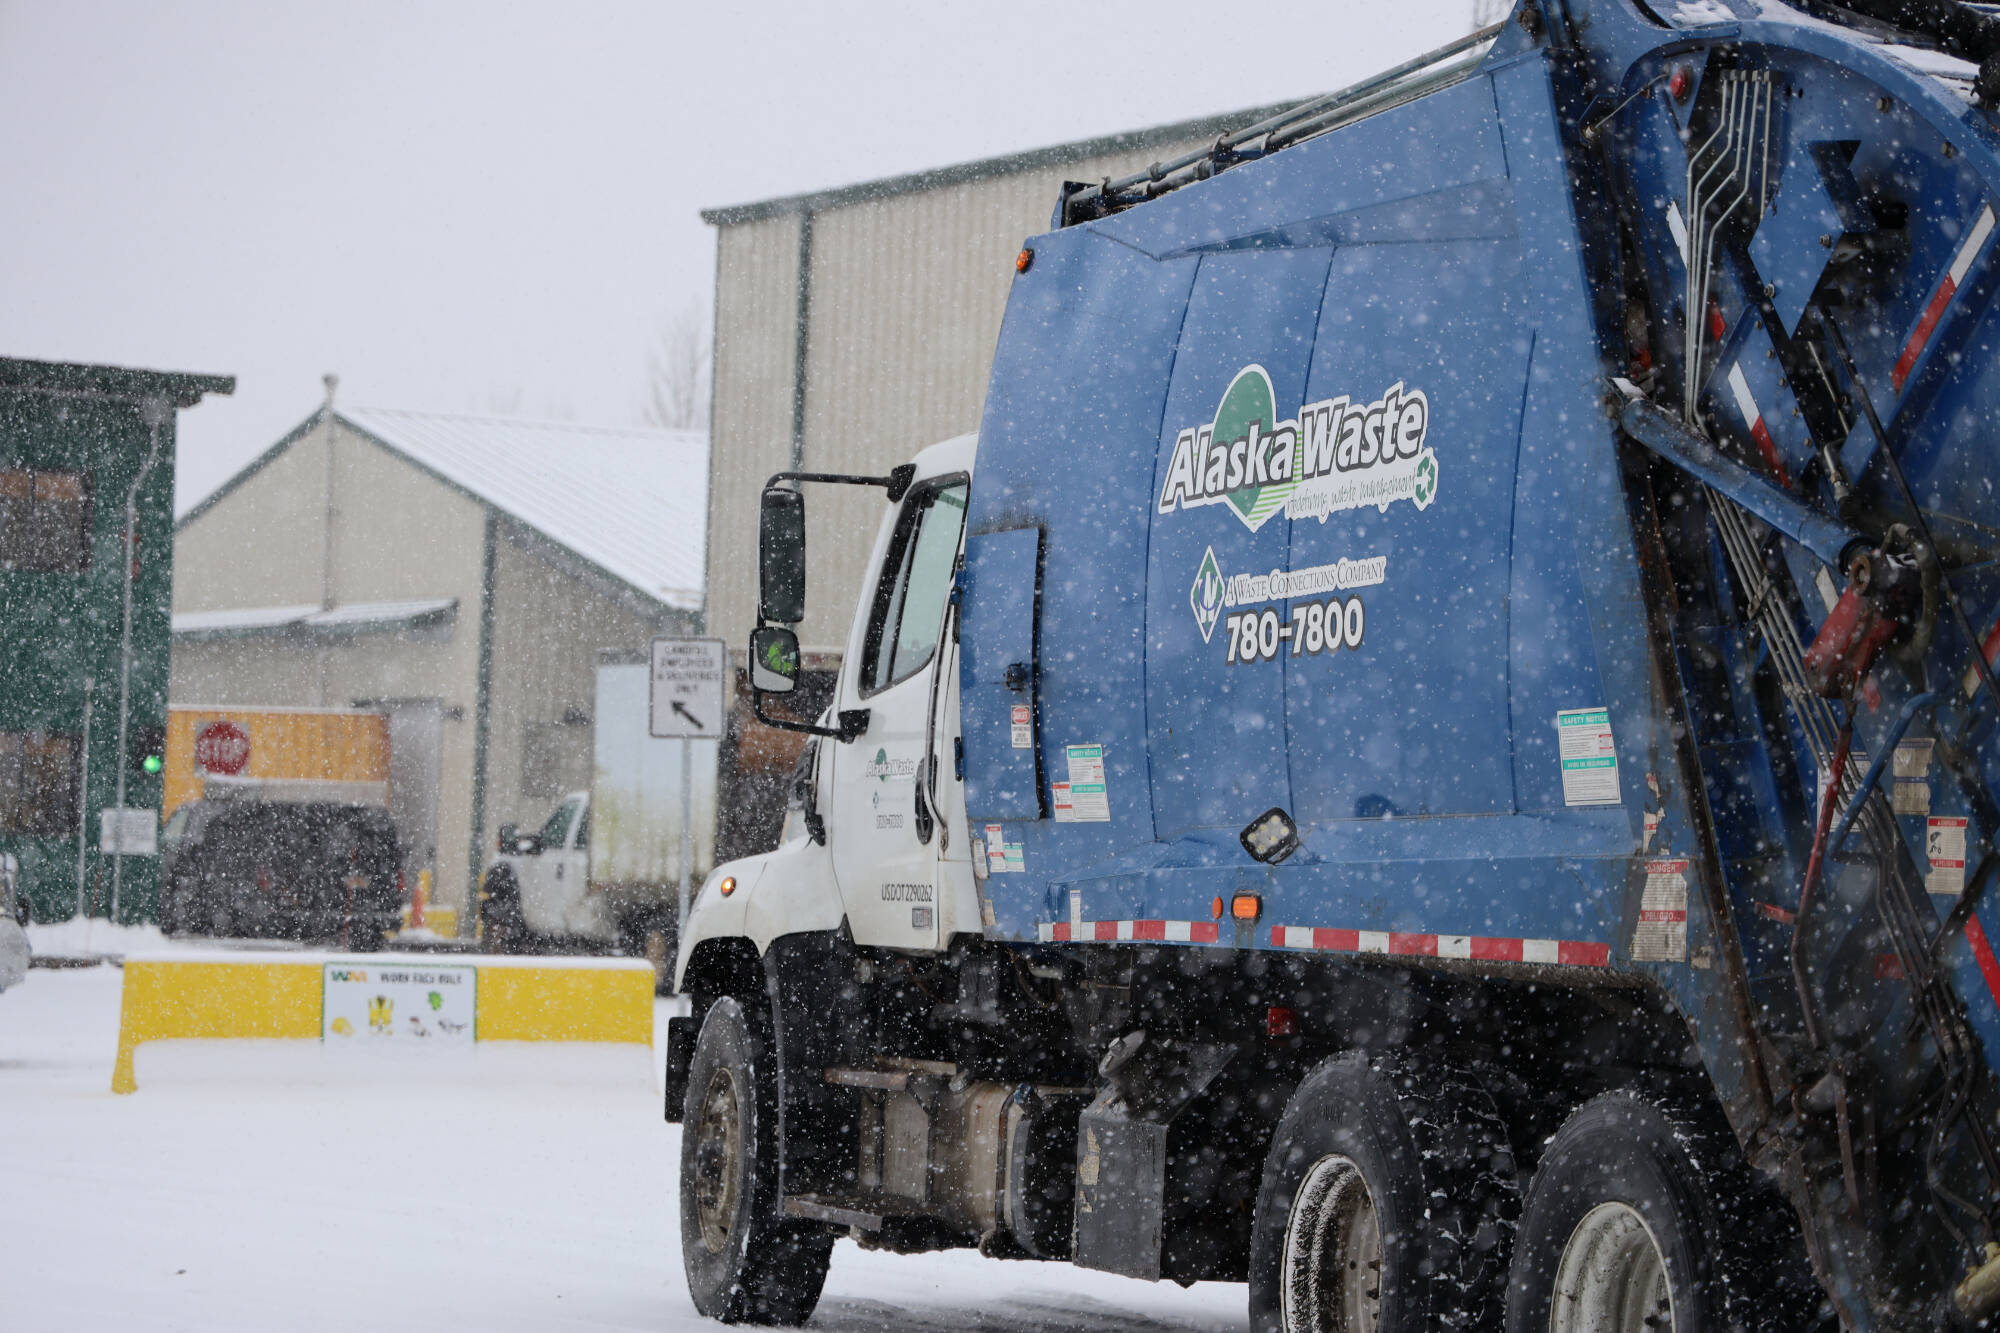 An Alaska Waste truck enters Waste Management's Capitol Disposal Landfill in Lemon Creek Monday morning. Starting Wednesday, residential prices will increase nearly three time the current amount and residential dumping hours will reduce also beginning Saturday. (Clarise Larson / Juneau Empire)